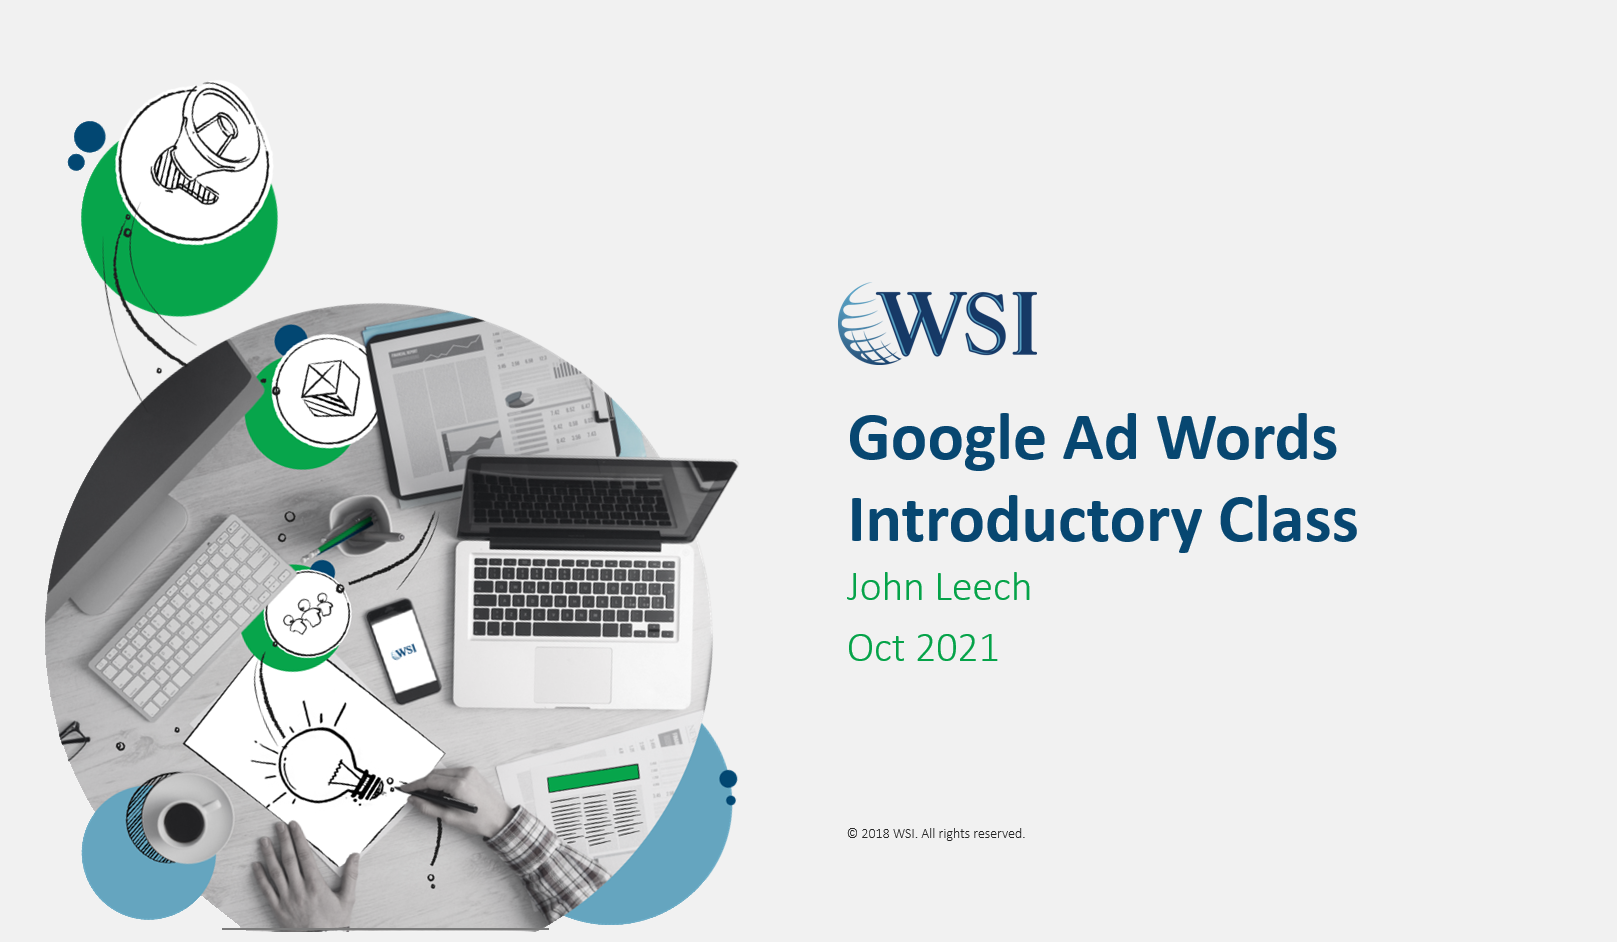 Google Ad Words Introductory Course